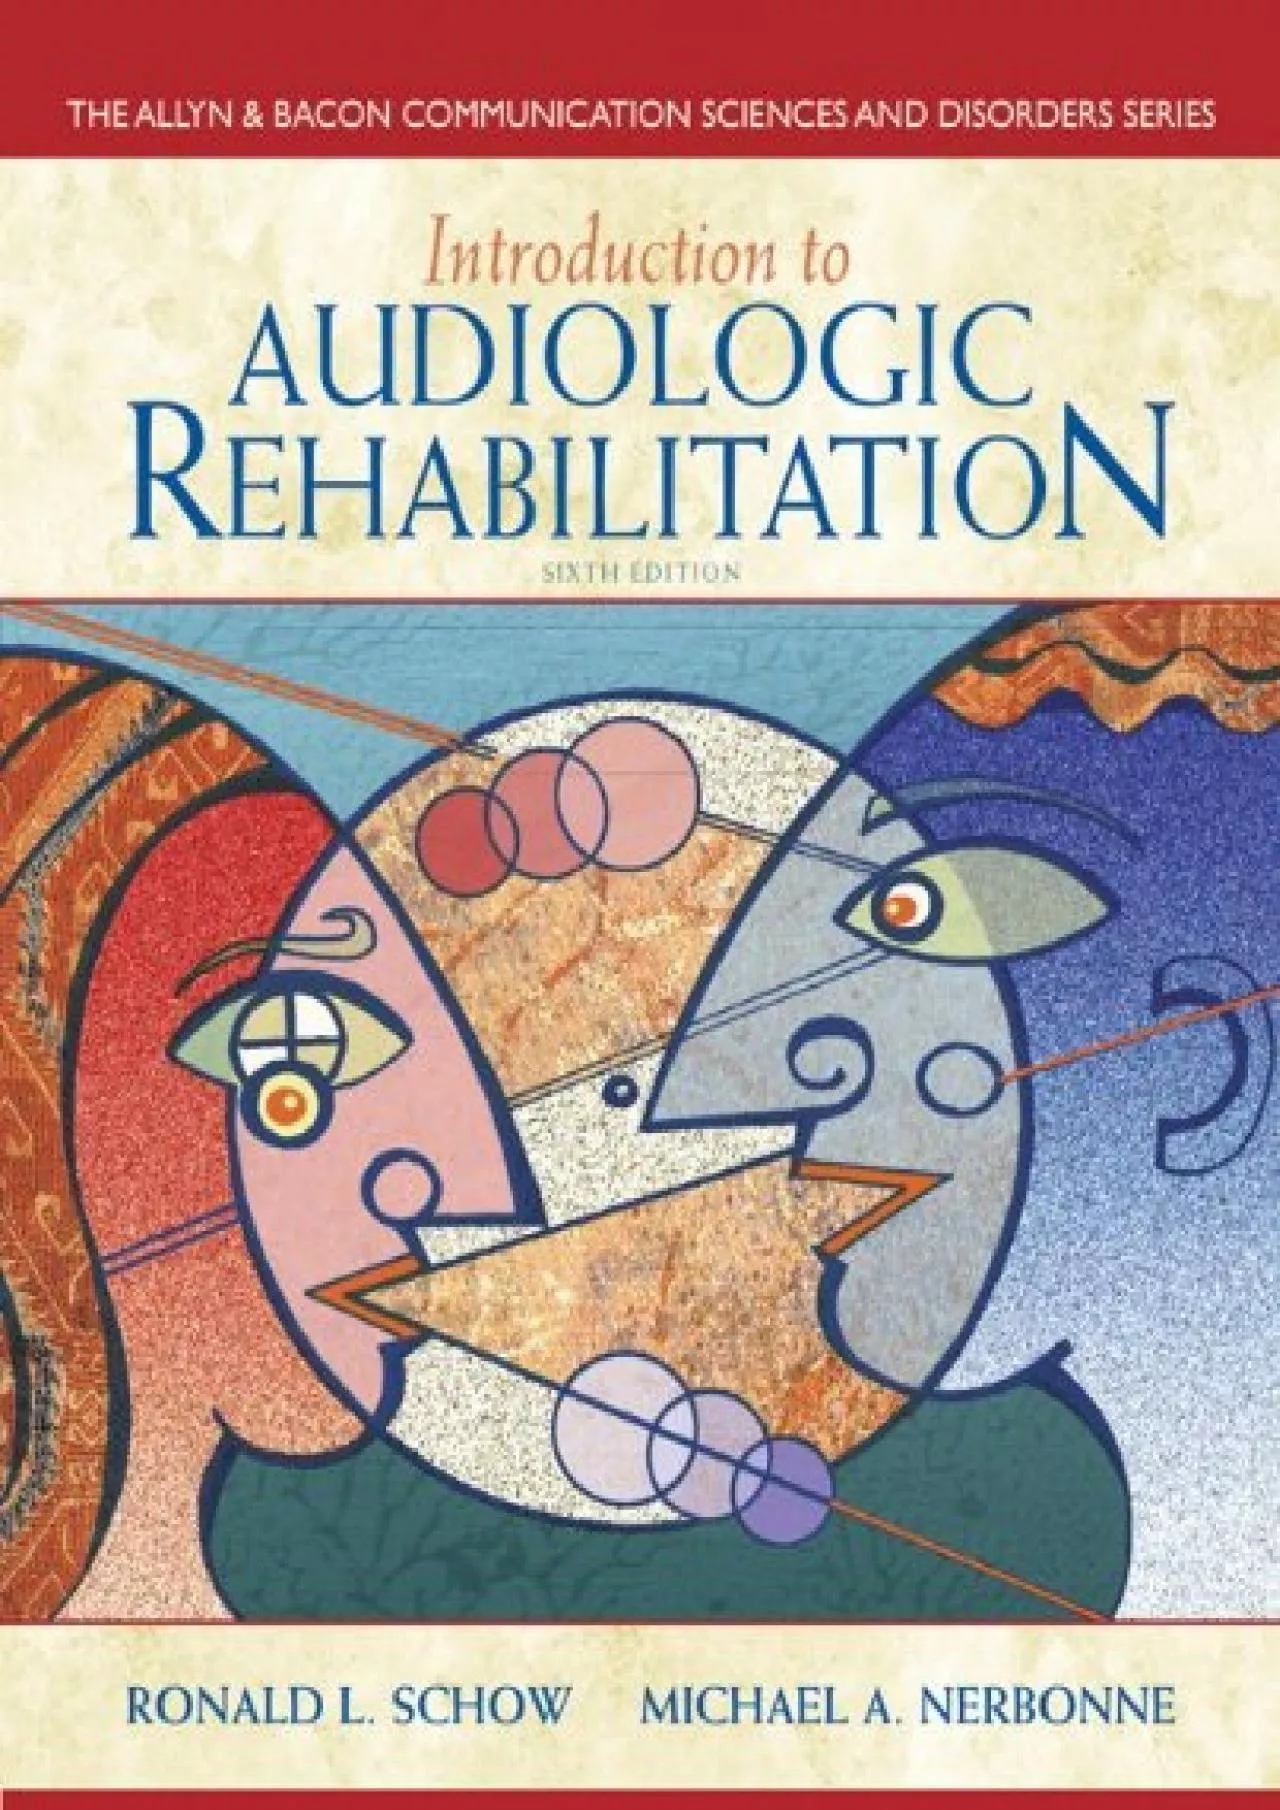 (BOOK)-Introduction to Audiologic Rehabilitation (6th Edition) (Allyn & Bacon Communication